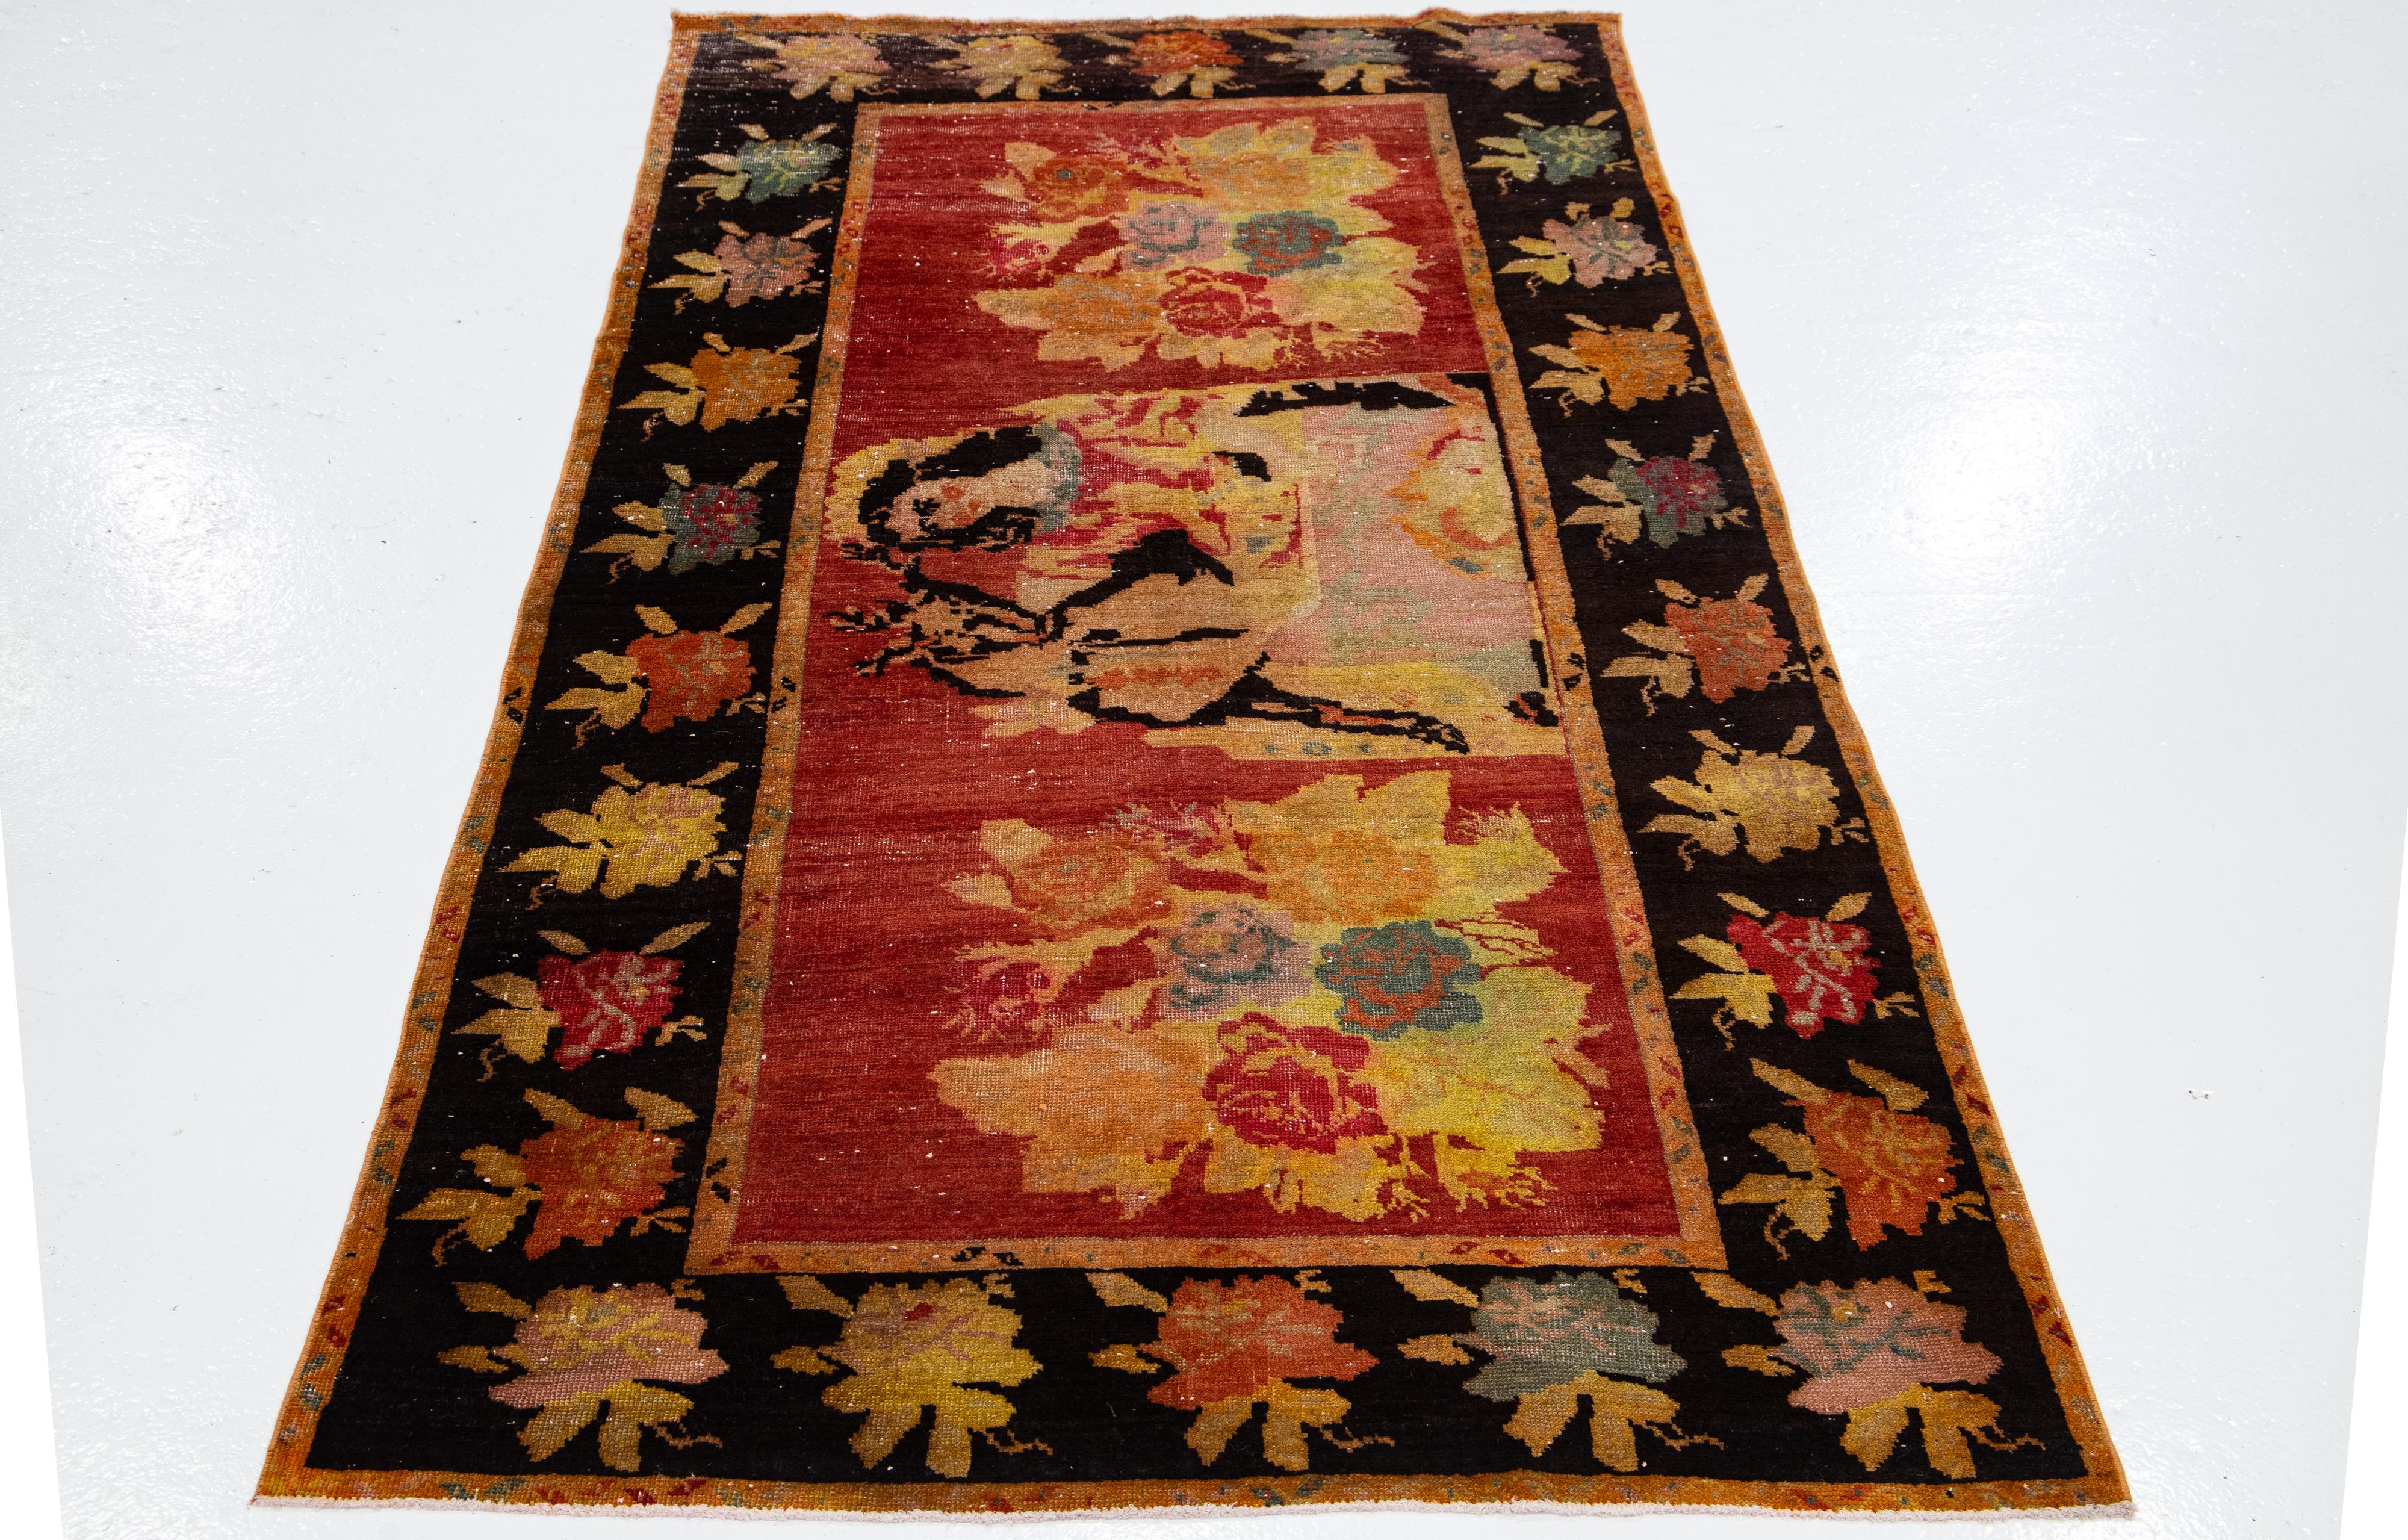 Beautiful antique Karabagh hand-knotted wool runner with a red field. This Persian runner has a brown frame and multicolor accents that feature an all-over pictorial design.

This rug measures 4'5